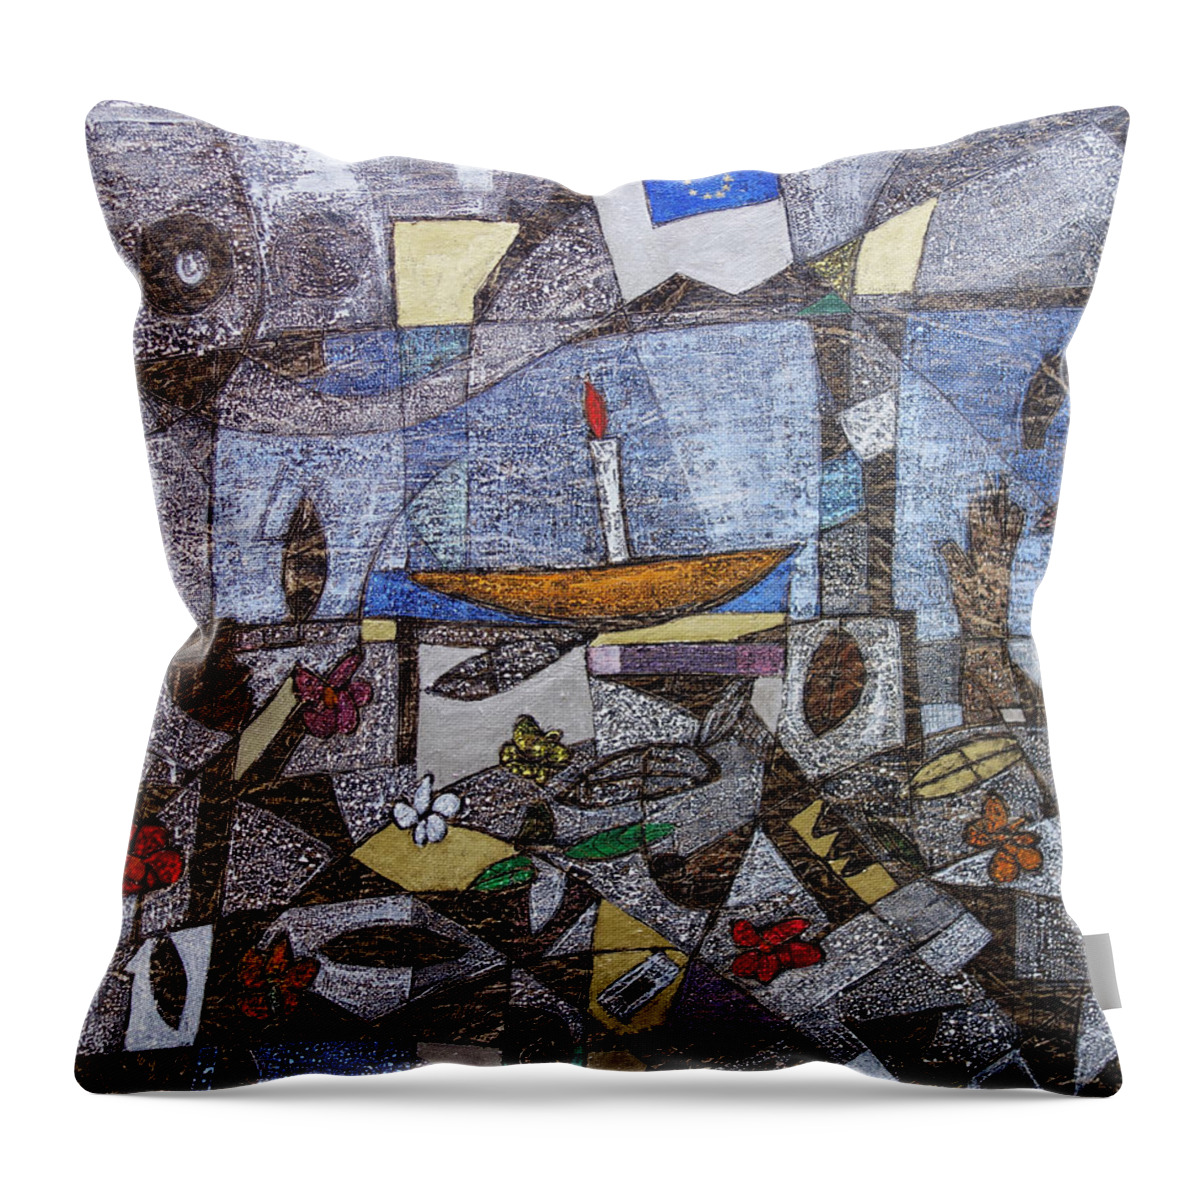 Migration Criss Throw Pillow featuring the painting Remembering Dreamers by Ronex Ahimbisibwe